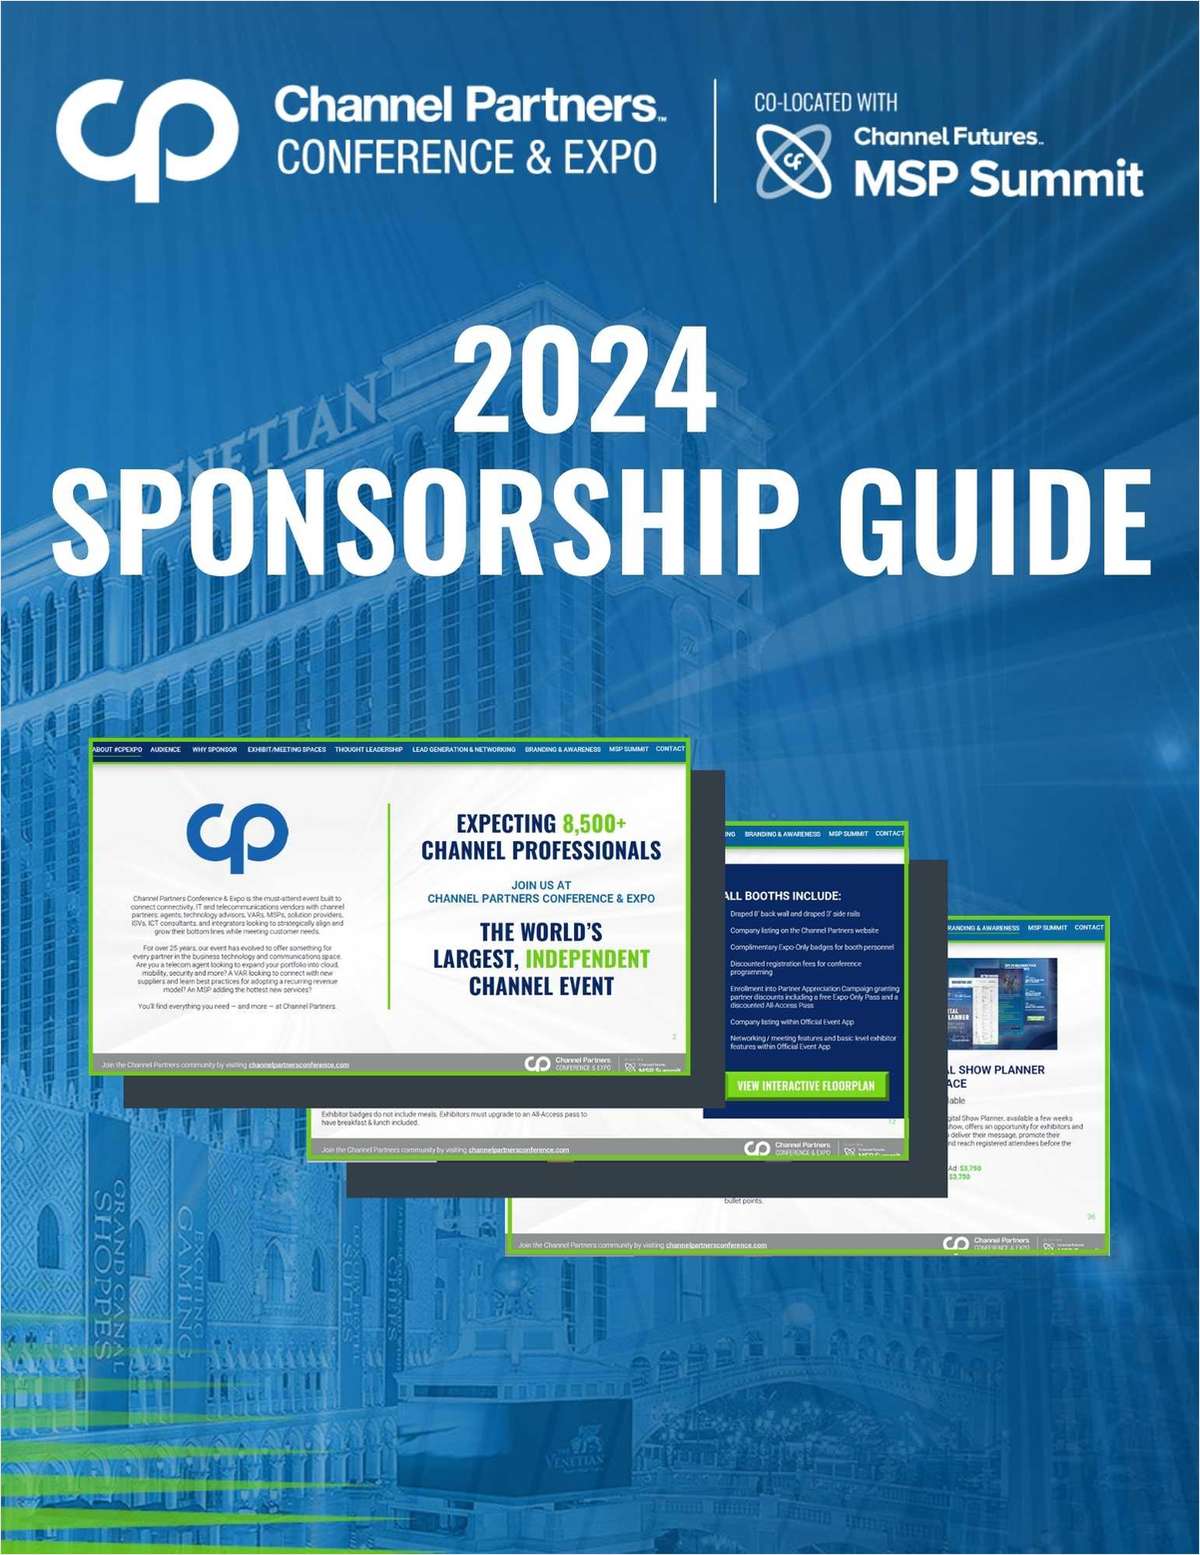 Sponsor at Channel Partners Conference & Expo/MSP Summit 2024